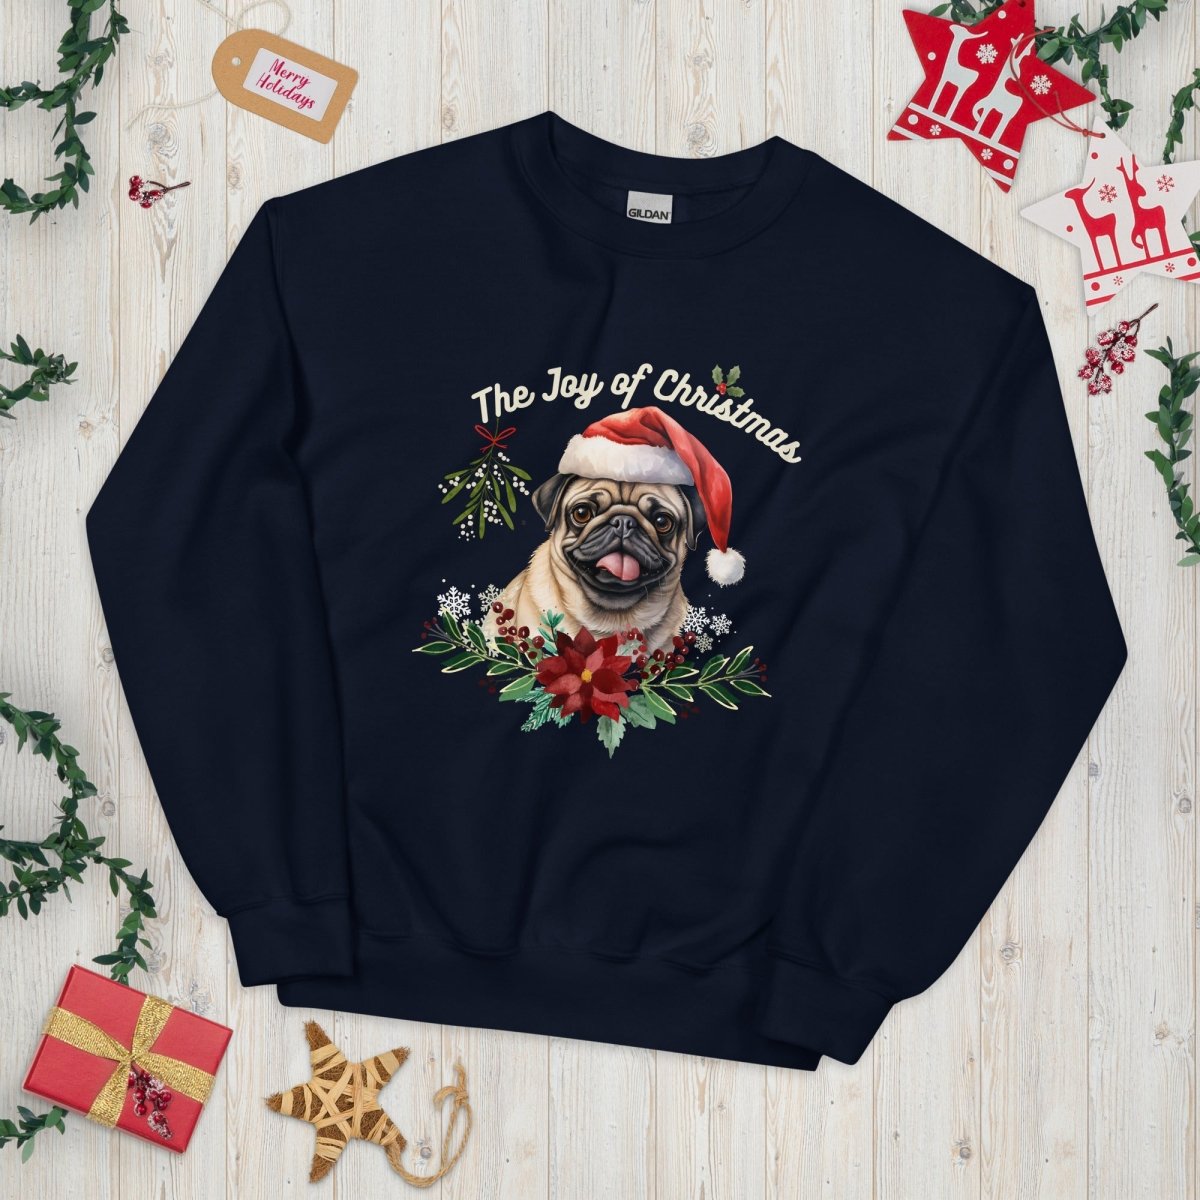 Christmas Pug Pullover - High Quality Festive Family Unisex Sweater, Gift for Her, Gift for Doglovers, Funny Xmas Sweater, Cute Xmas Dog - Everything Pixel